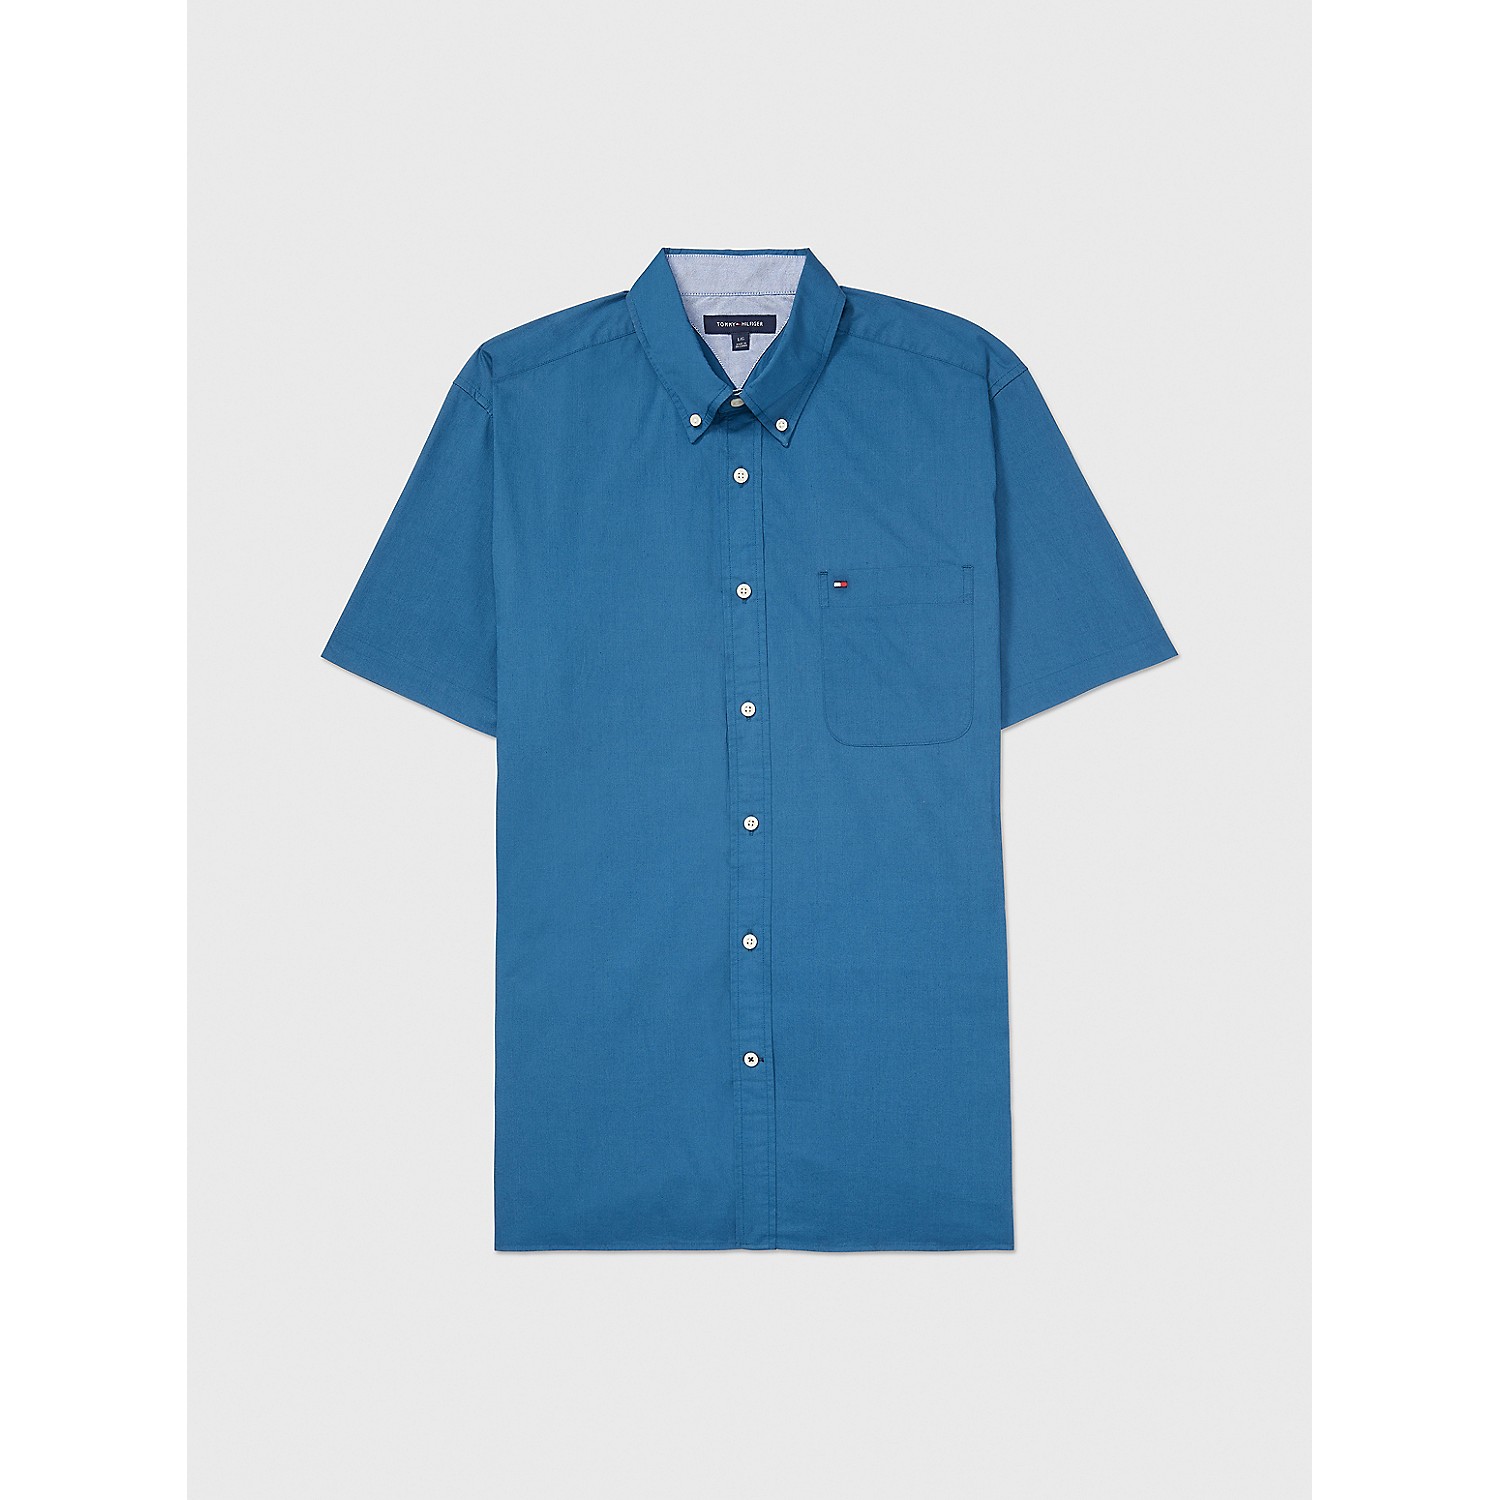 TOMMY HILFIGER Seated Fit Solid Shirt